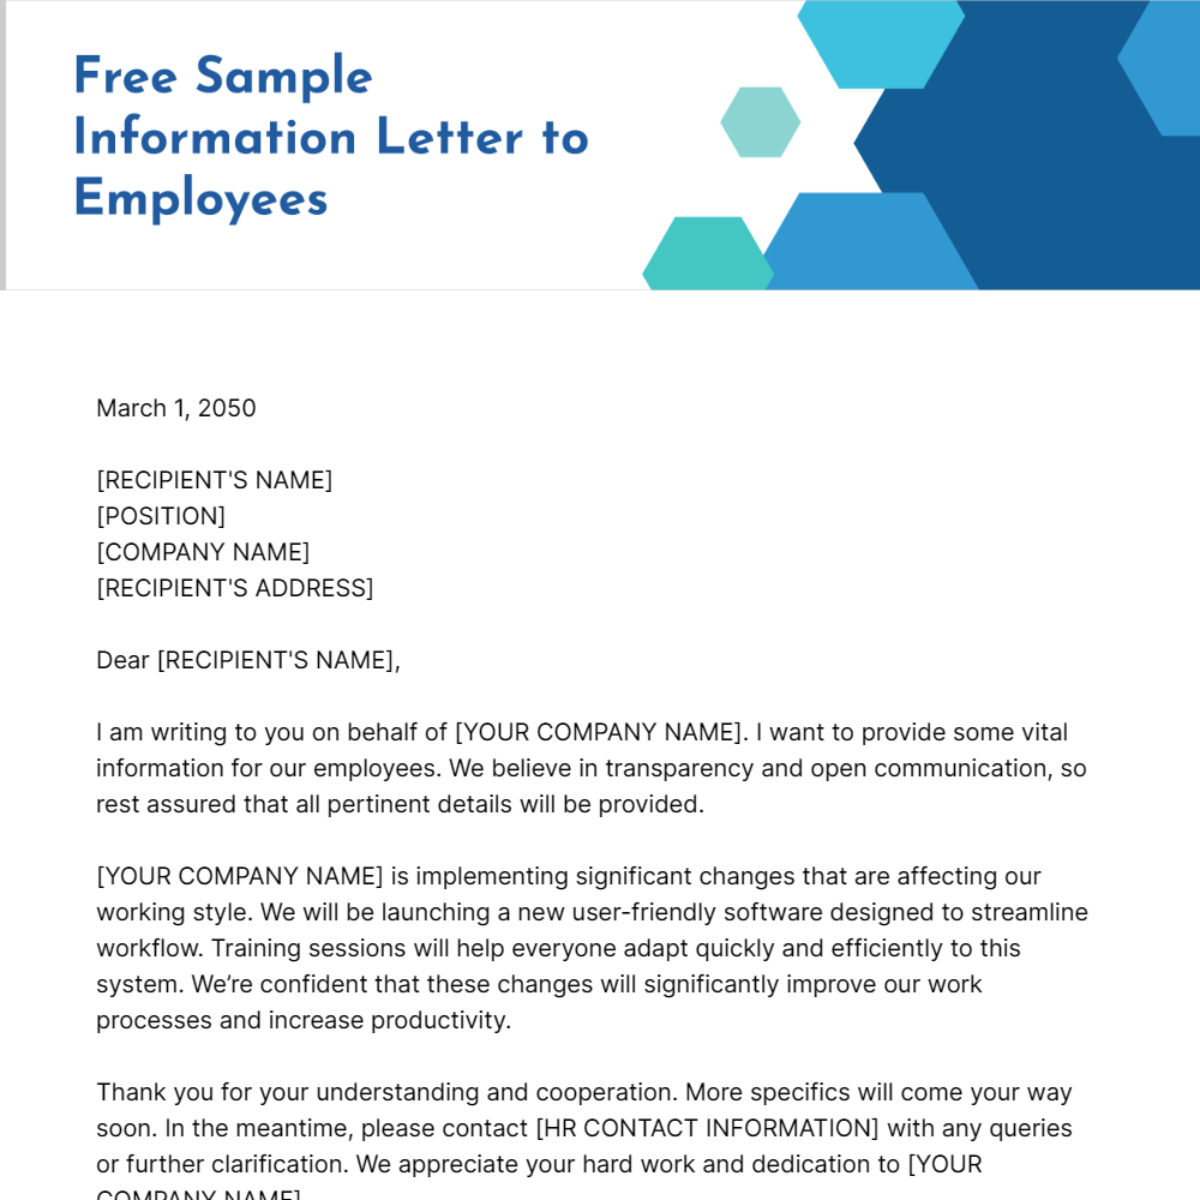 Sample Information Letter to Employees Template